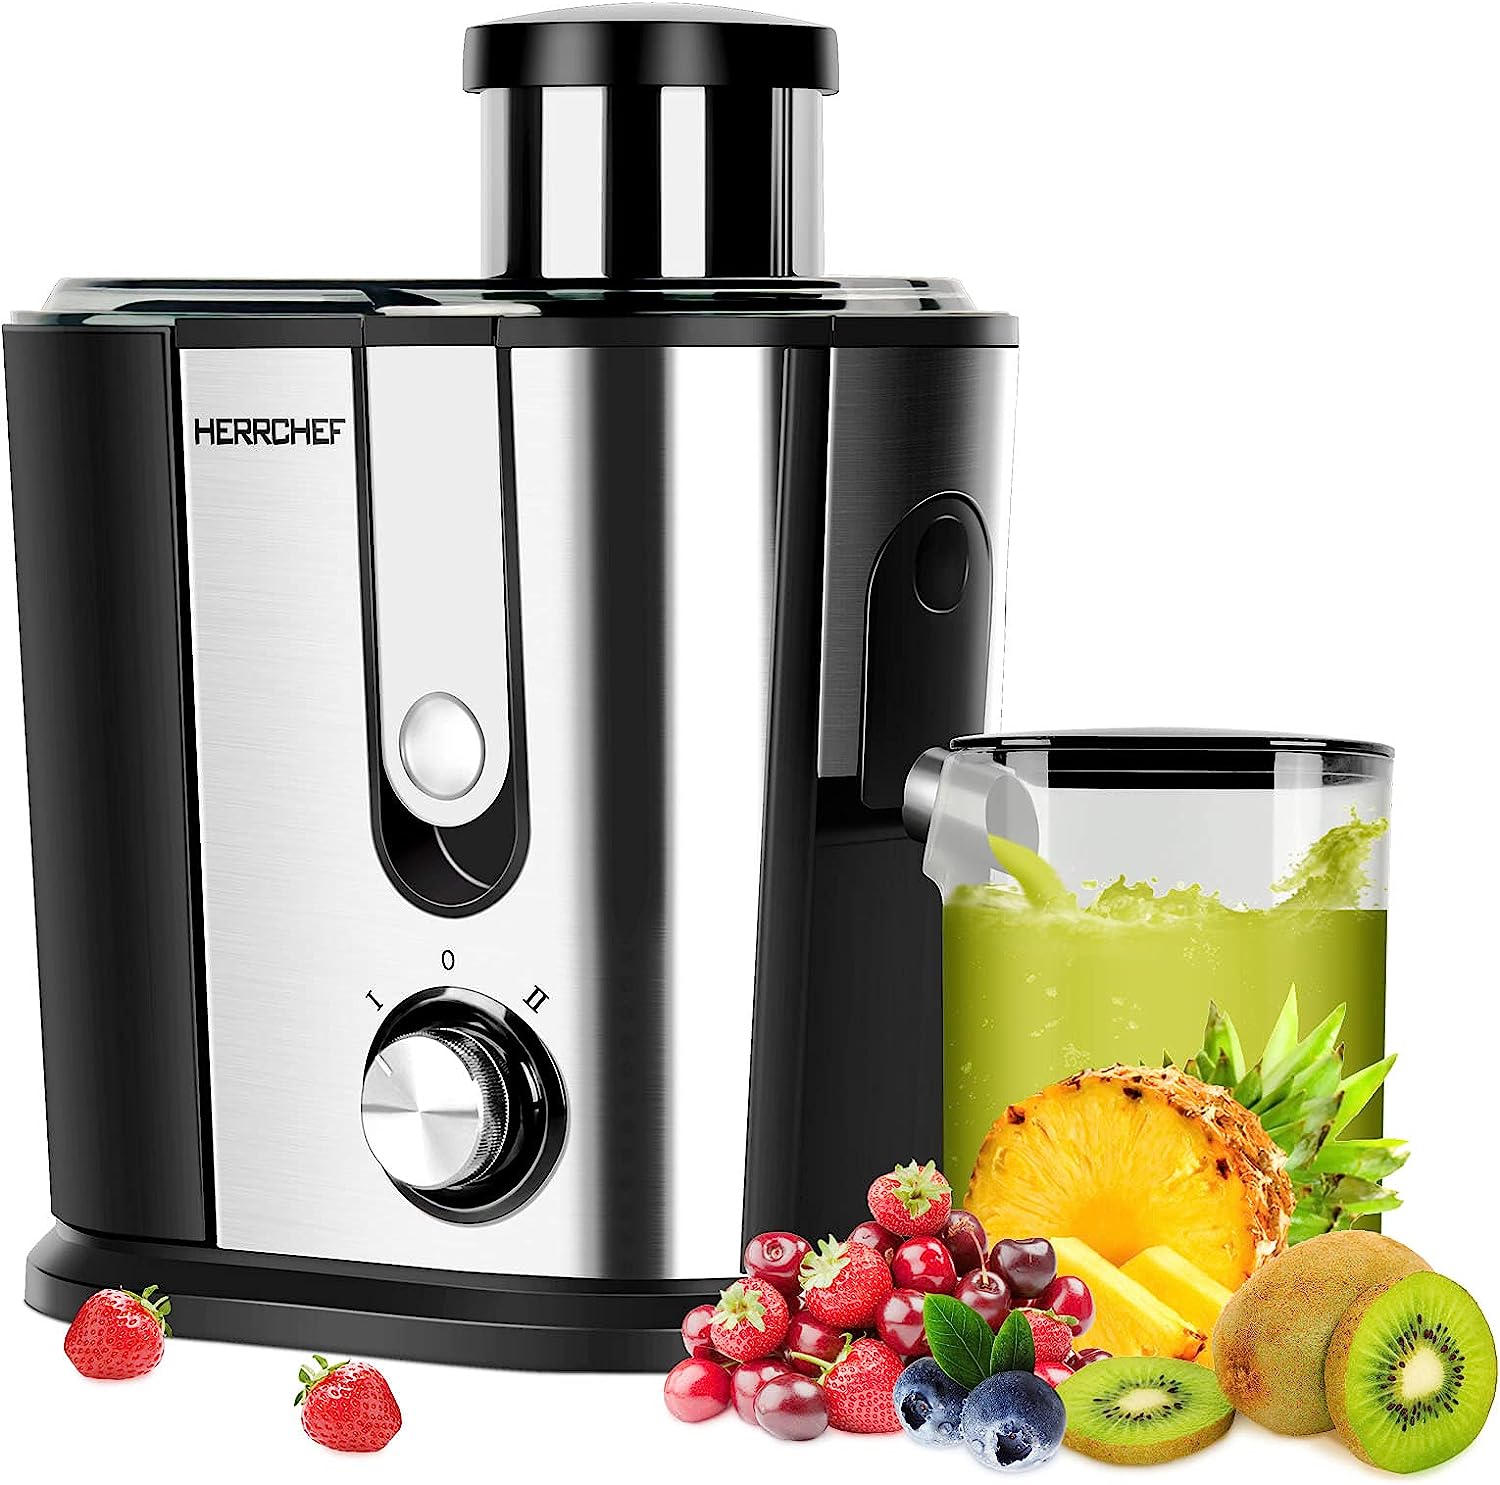 How To Use A Herrchef Juicer